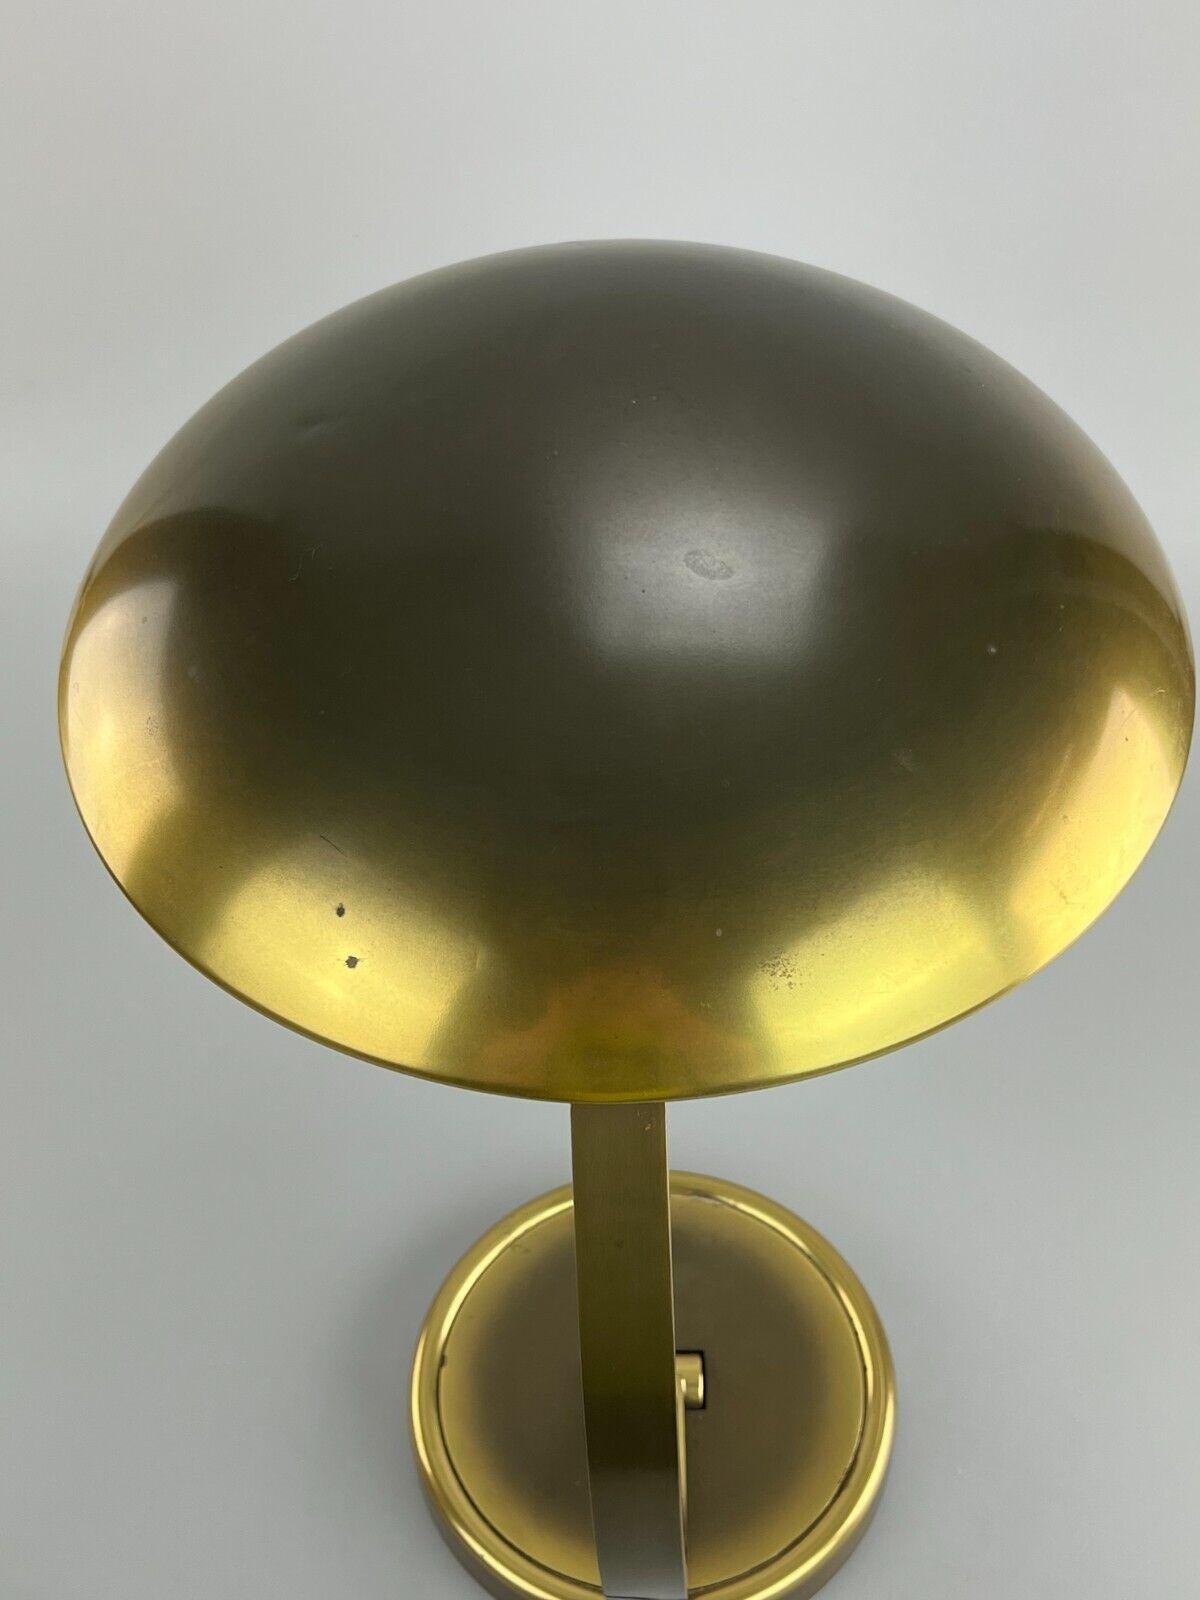 60s Lamp Light Kaiser Idell Table Lamp 6751 Brass Mid-Century Design In Good Condition For Sale In Neuenkirchen, NI